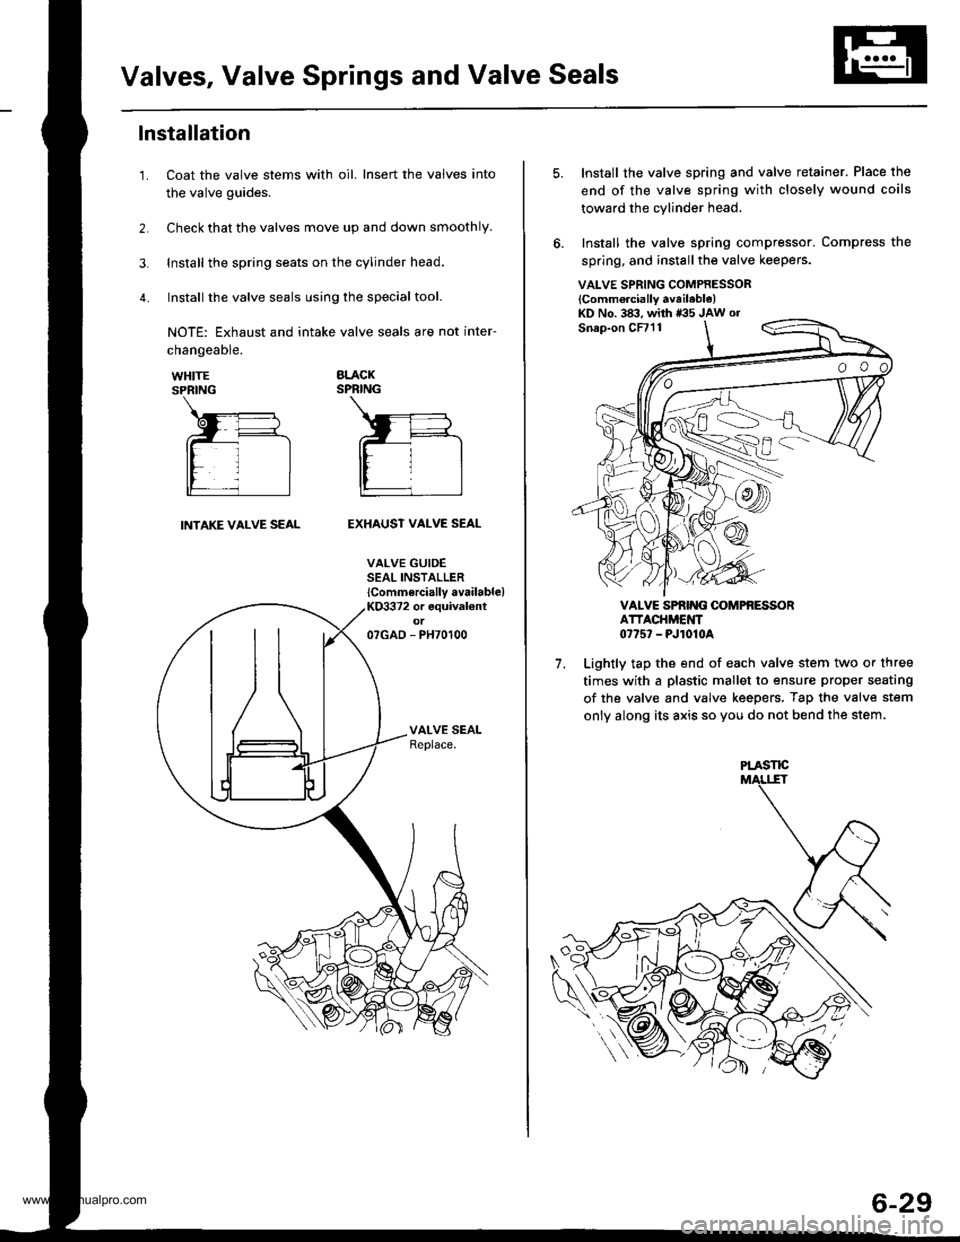 HONDA CR-V 1999 RD1-RD3 / 1.G Workshop Manual 
Valves, Valve Springs and Valve Seals
lnstallation
Coat the valve stems with oil. Insert the valves into
the valve guides.
Check that the valves move up and down smoothly.
Install the spring seats on